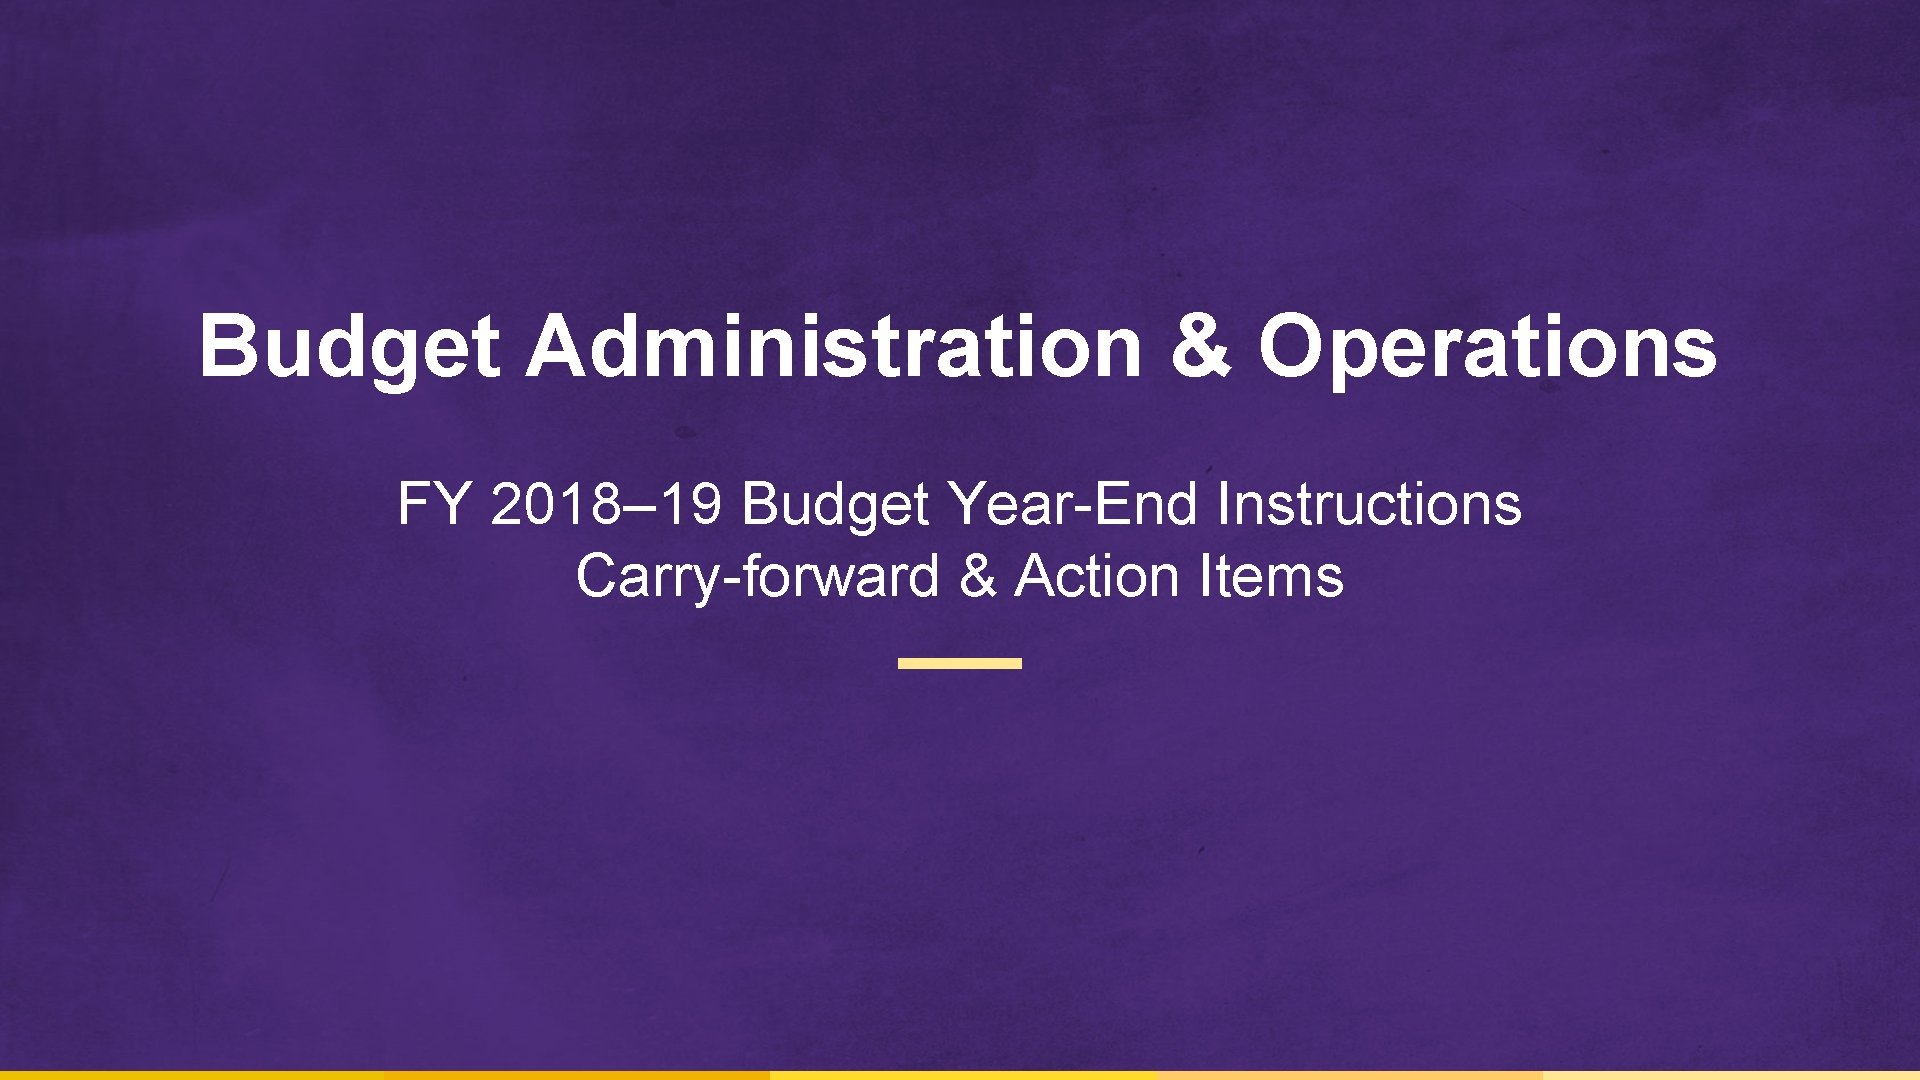 Budget Administration & Operations FY 2018– 19 Budget Year-End Instructions Carry-forward & Action Items